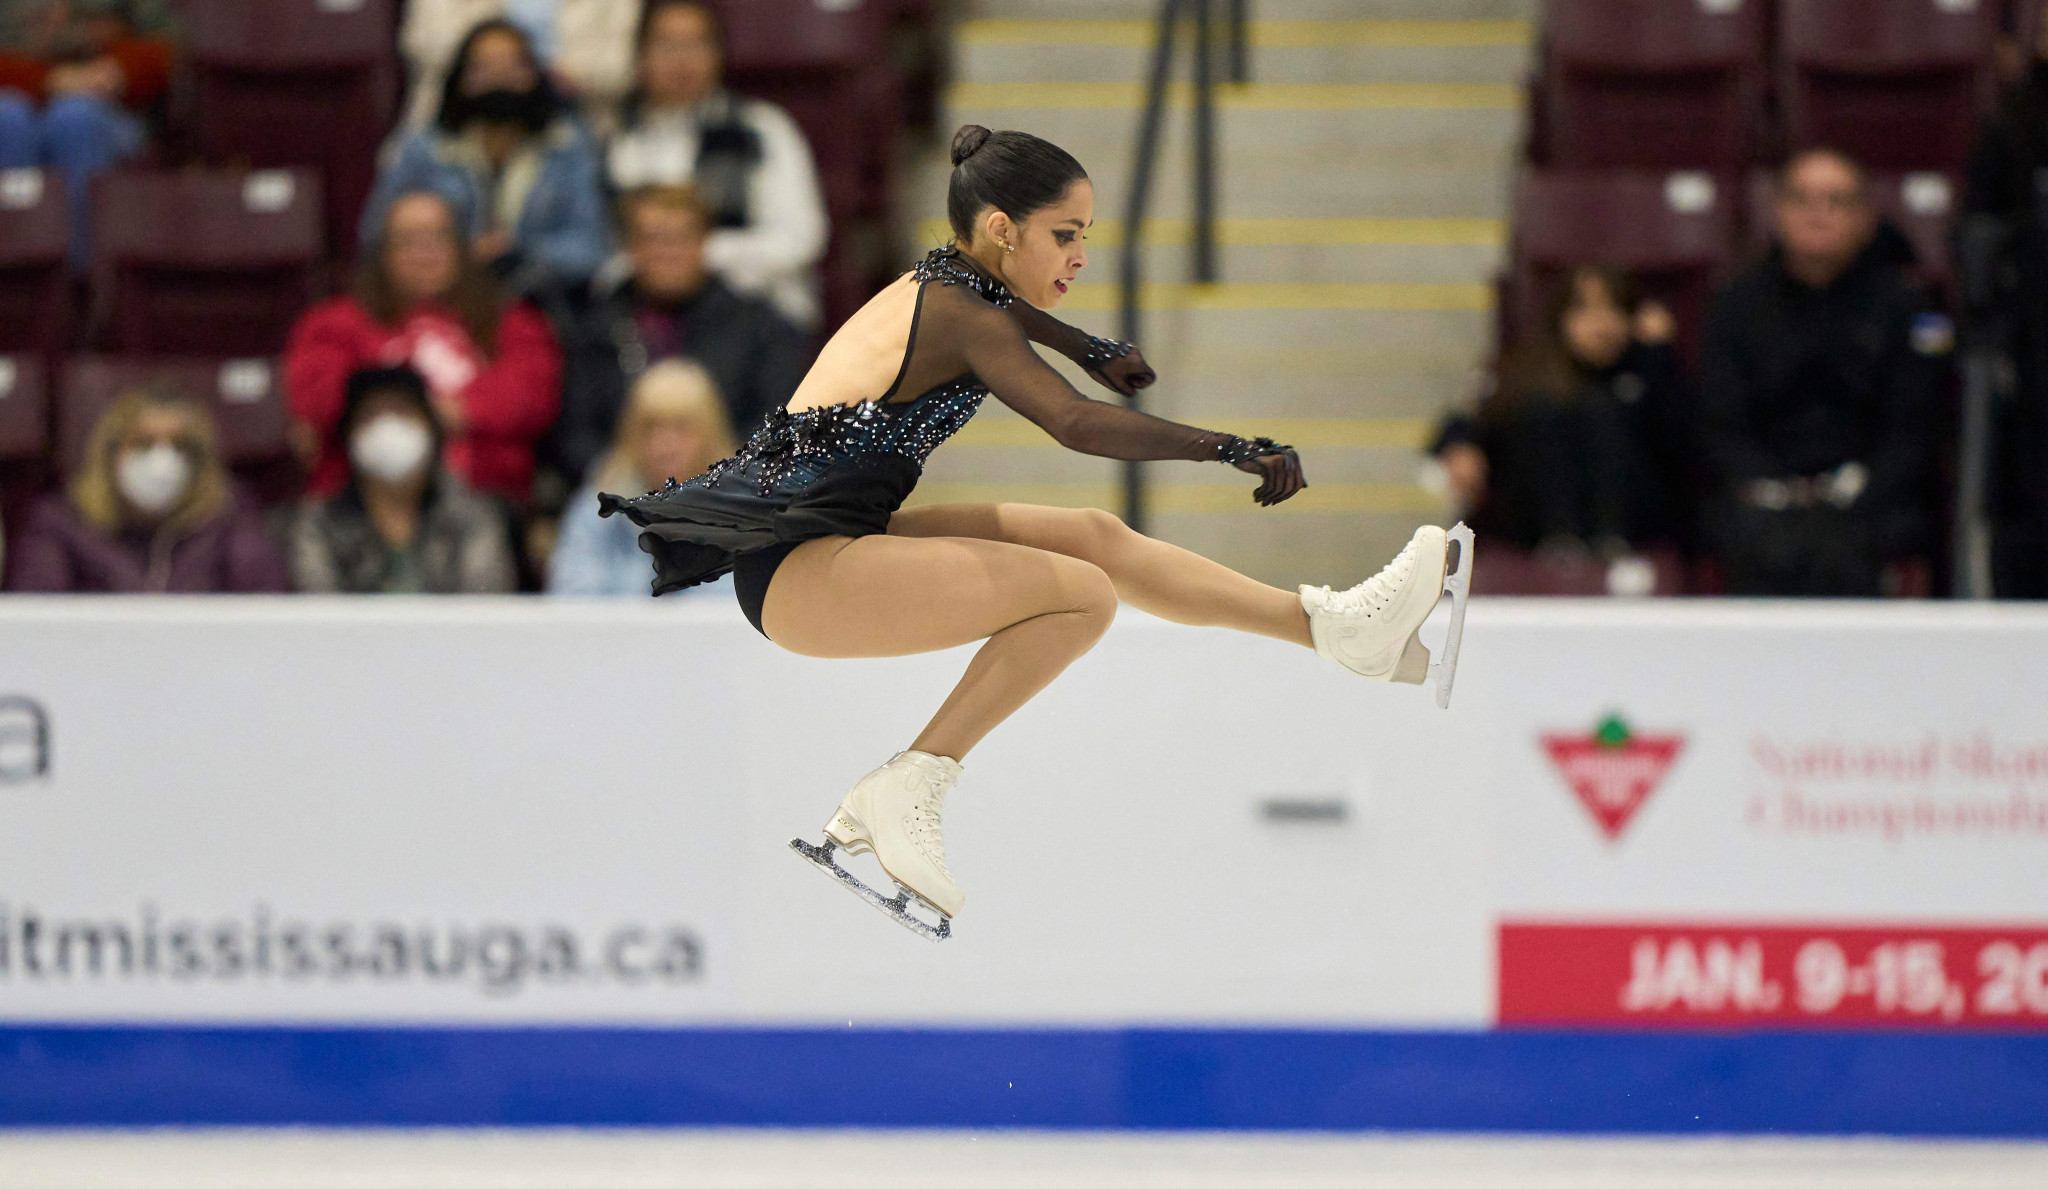 Teenagers Schizas and Miura seize Skate Canada leads